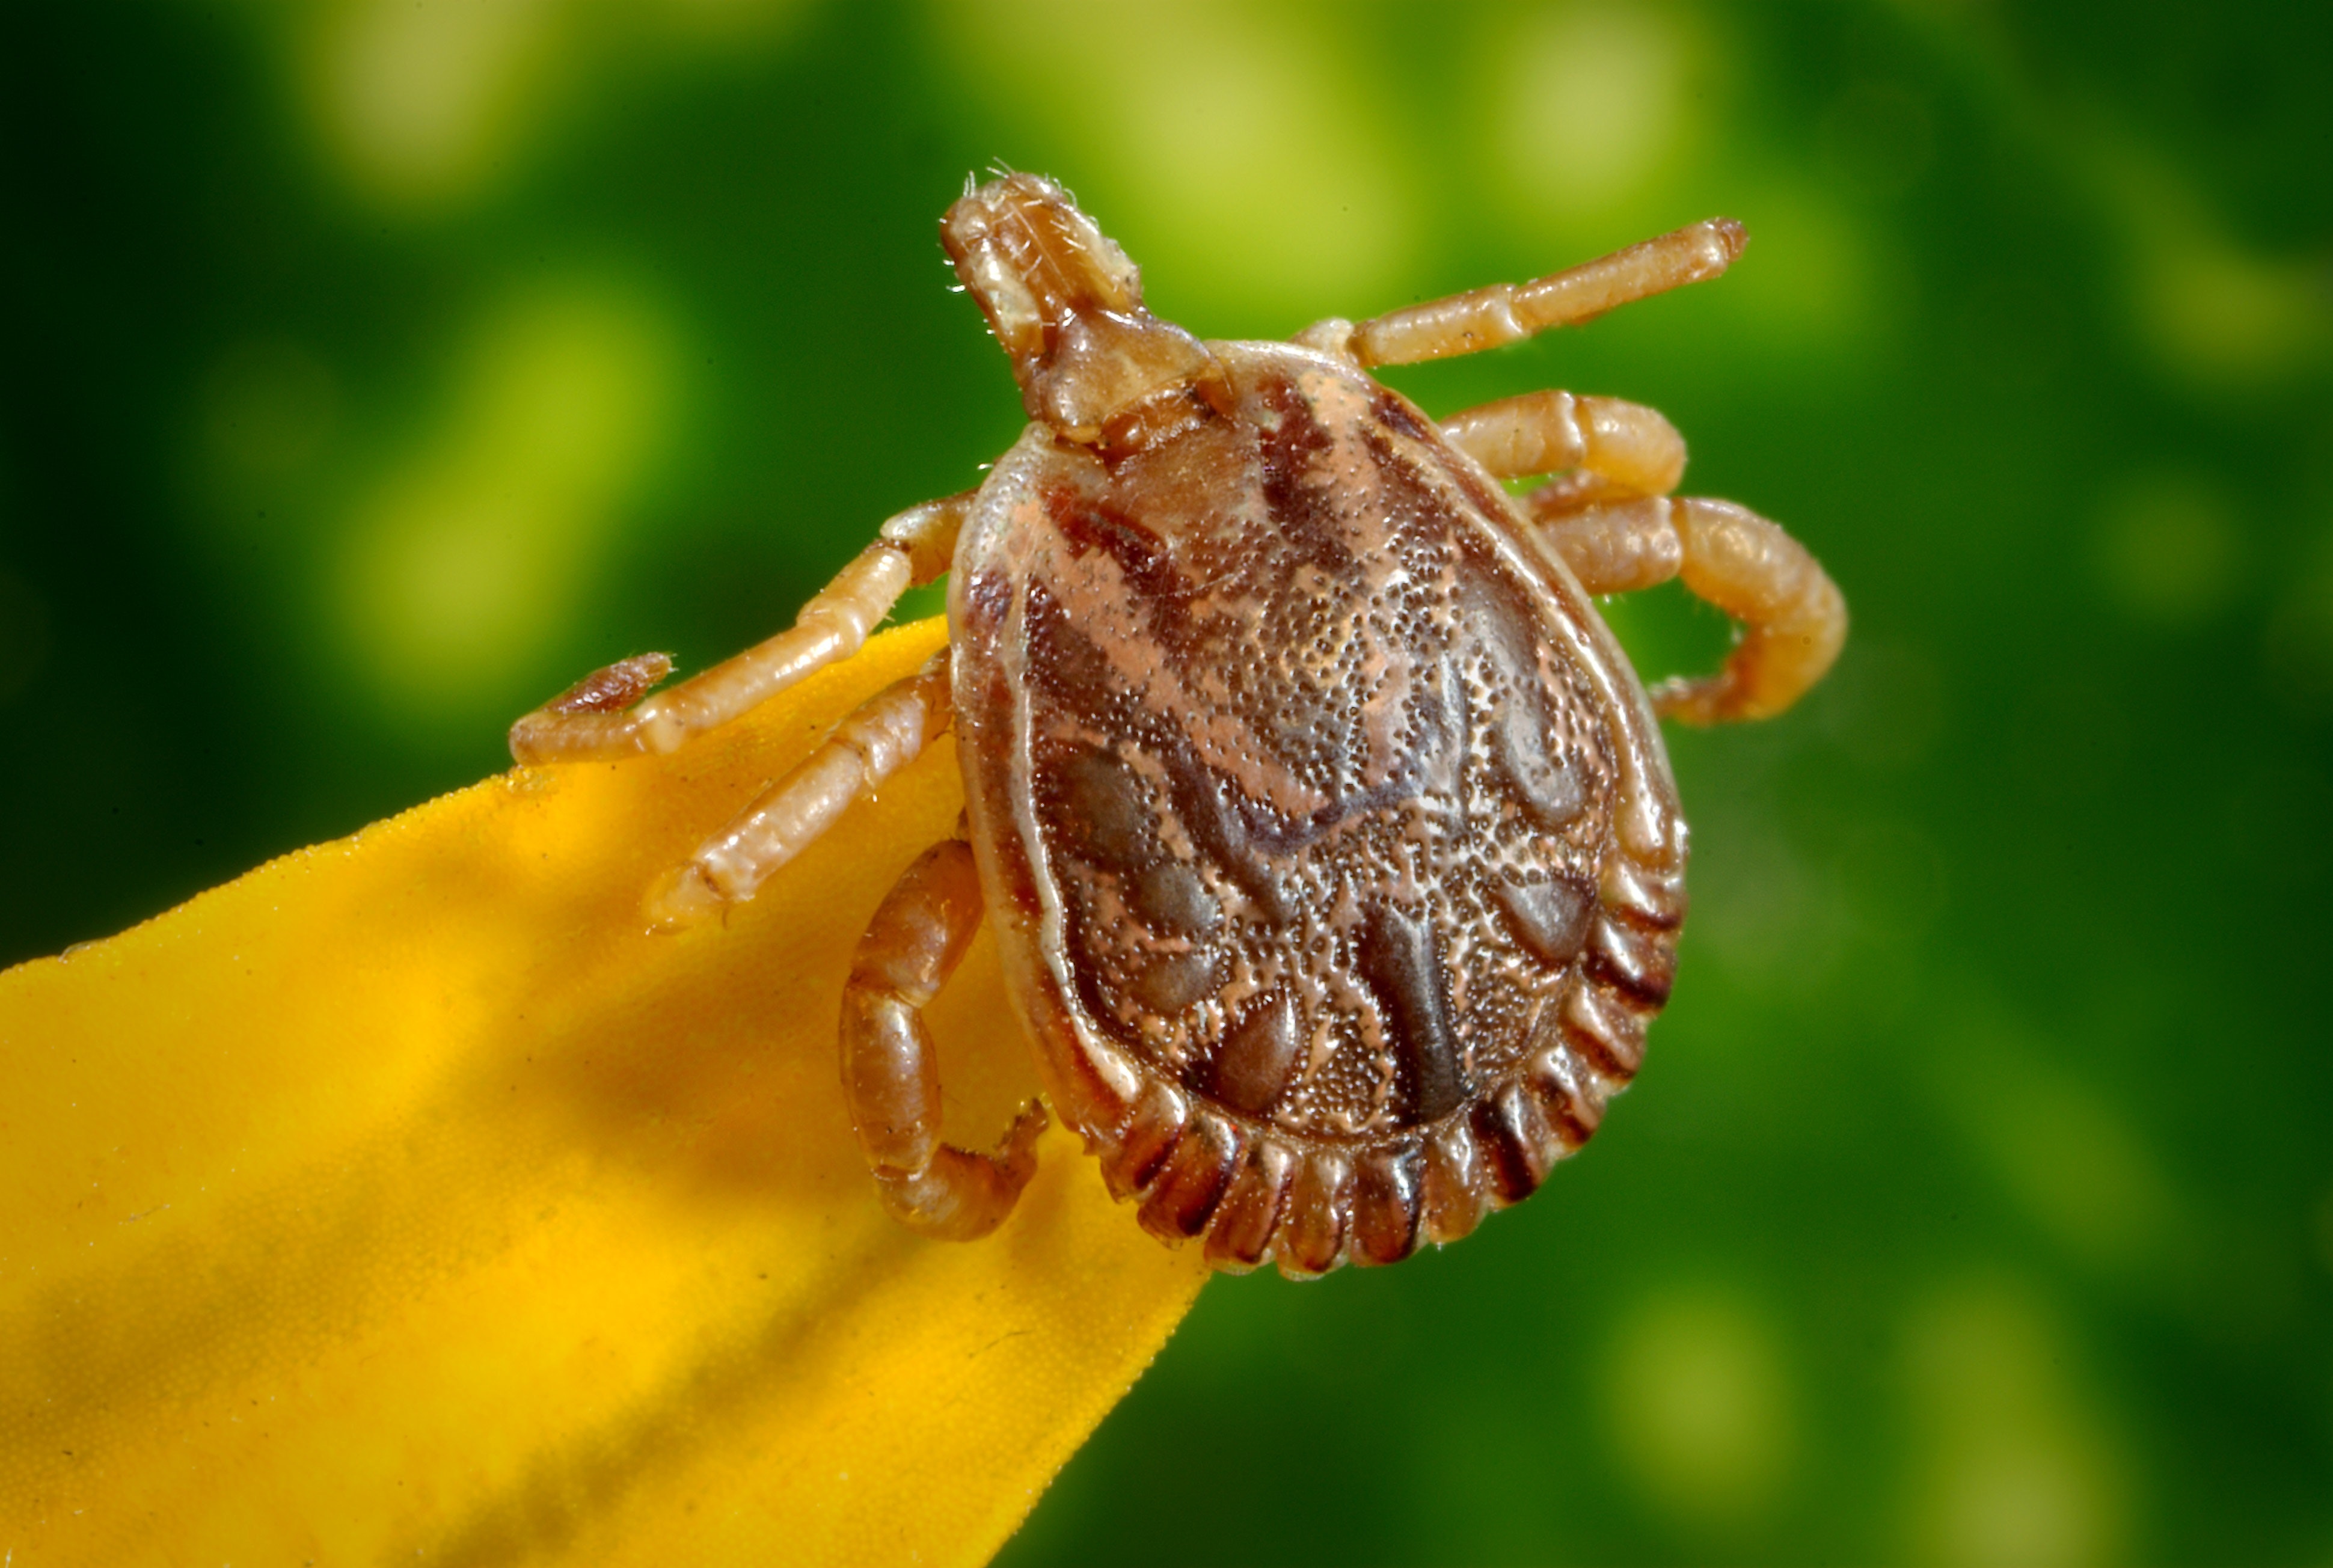 Top 8 Things Should Know About Ticks